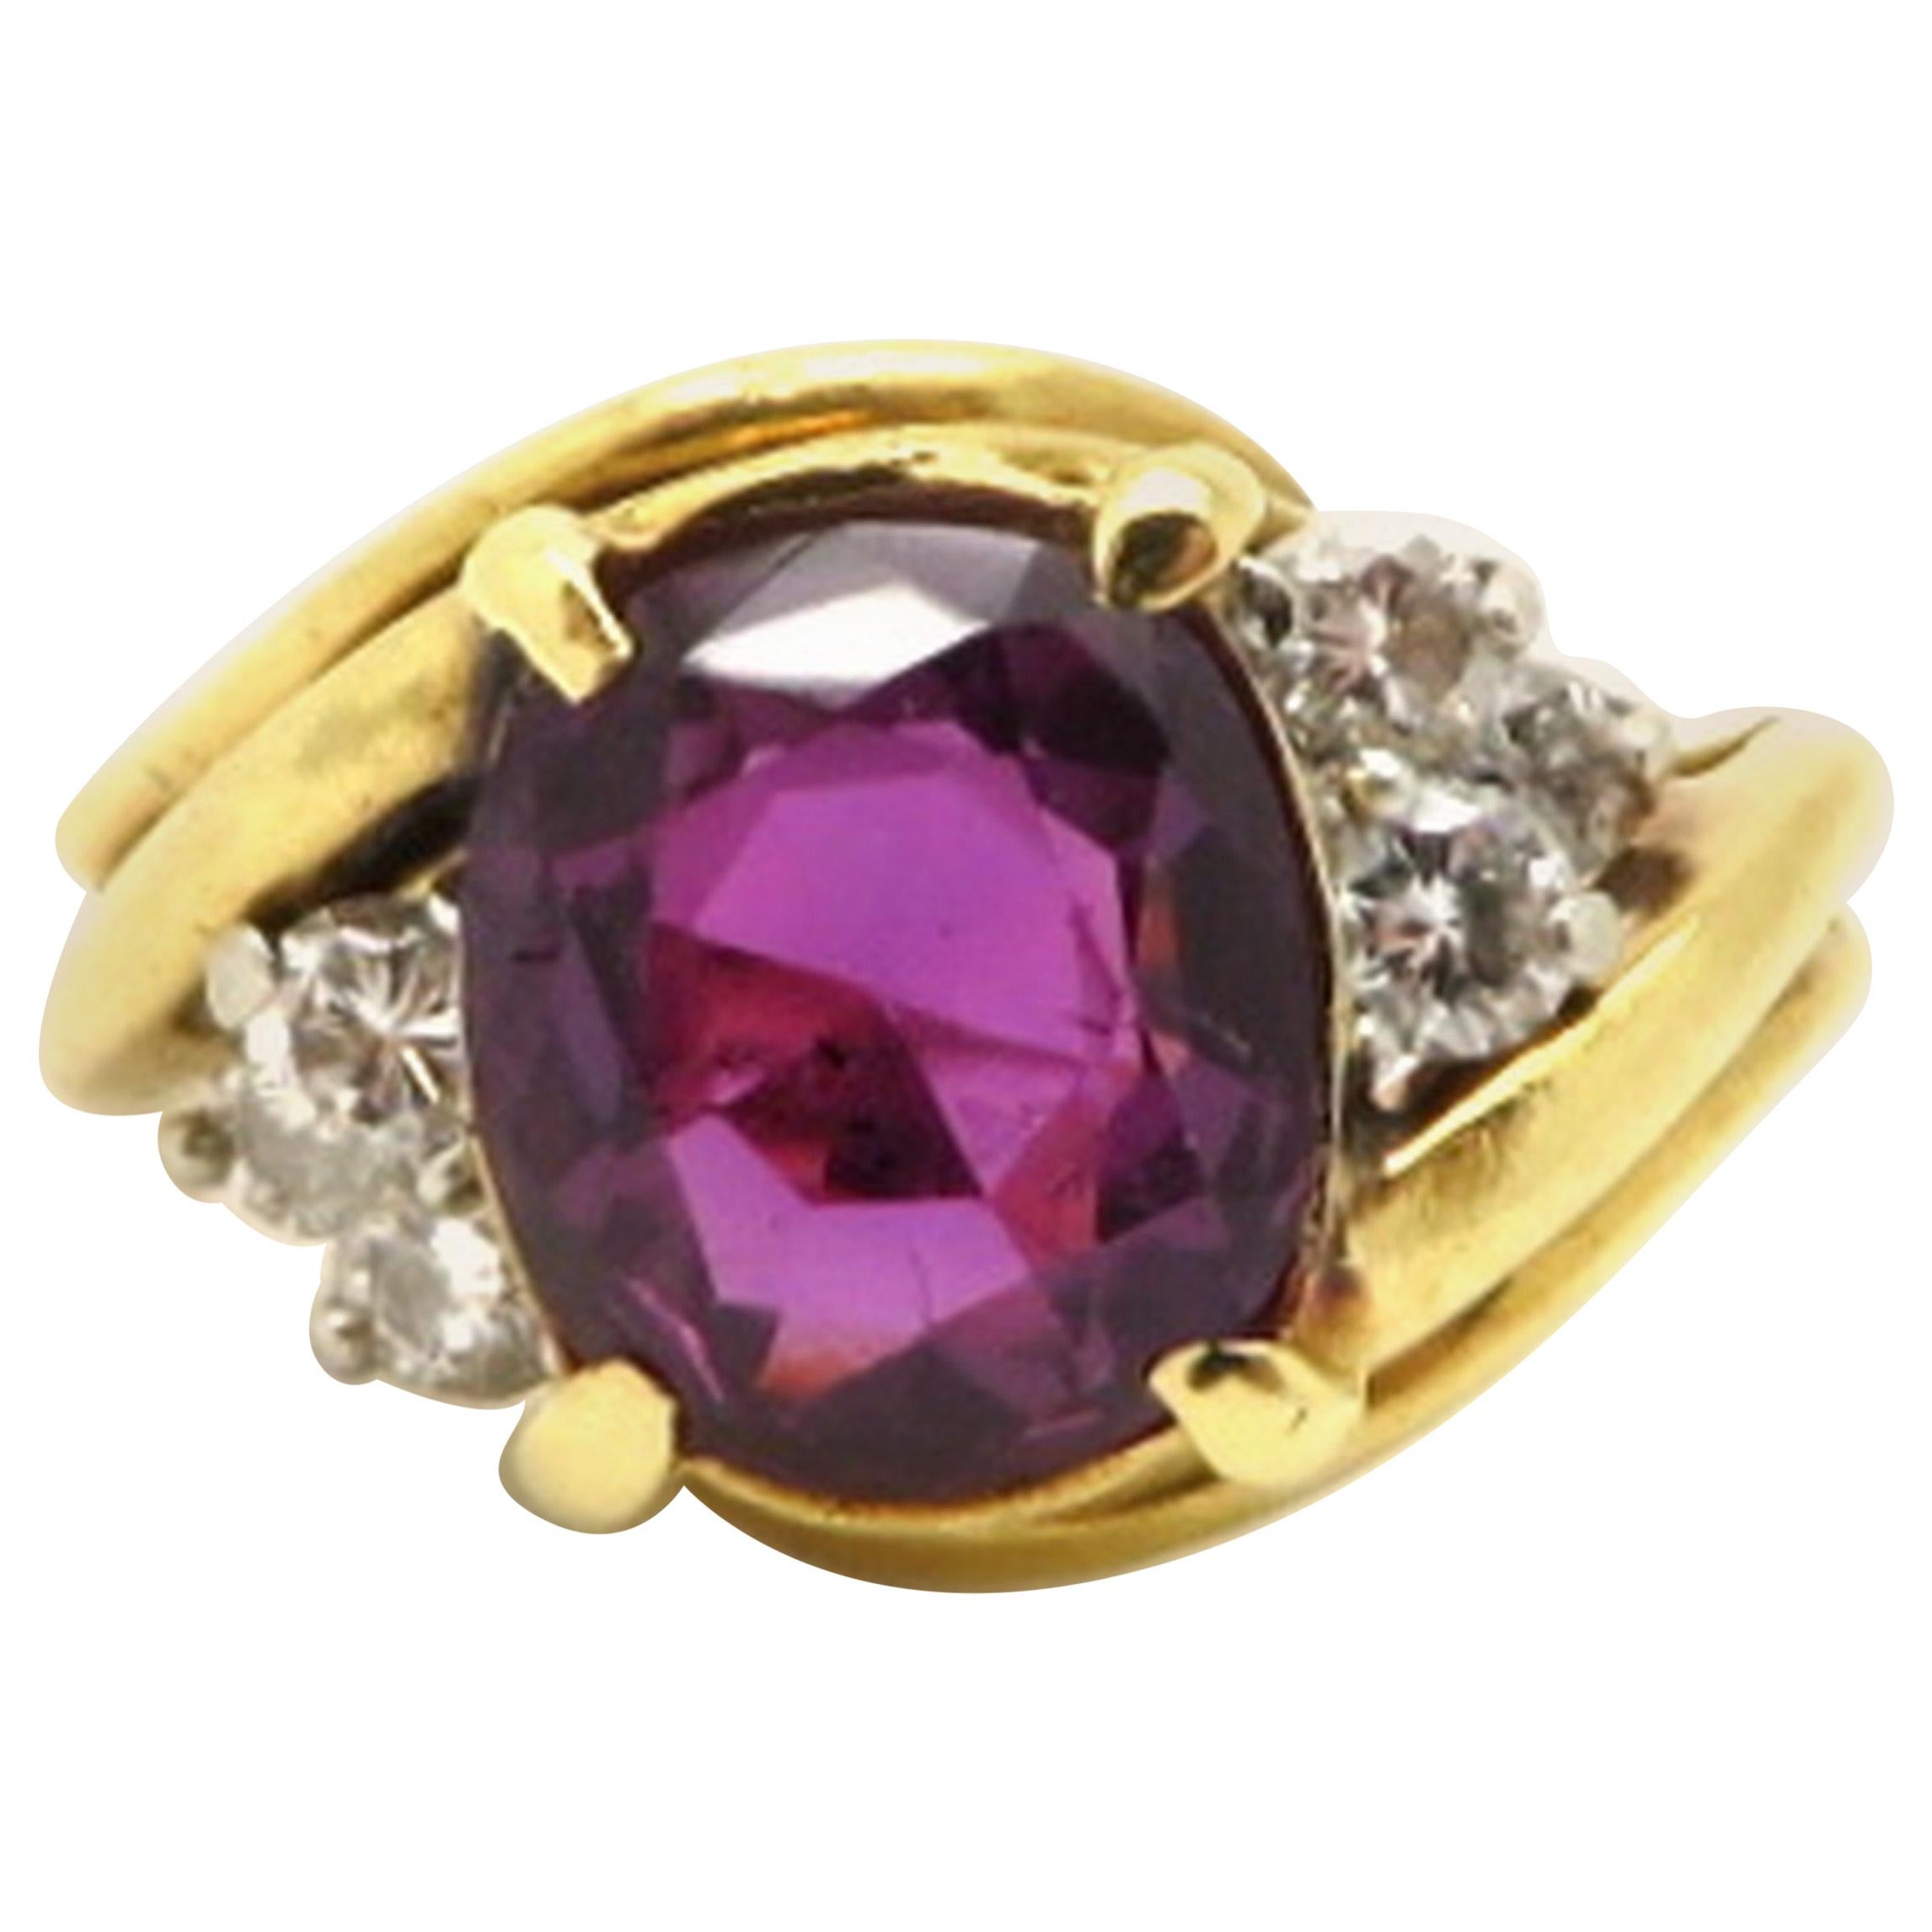 Designer Cartier GIA Certified Purple Sapphire and Diamond 18 Karat Gold Ring For Sale